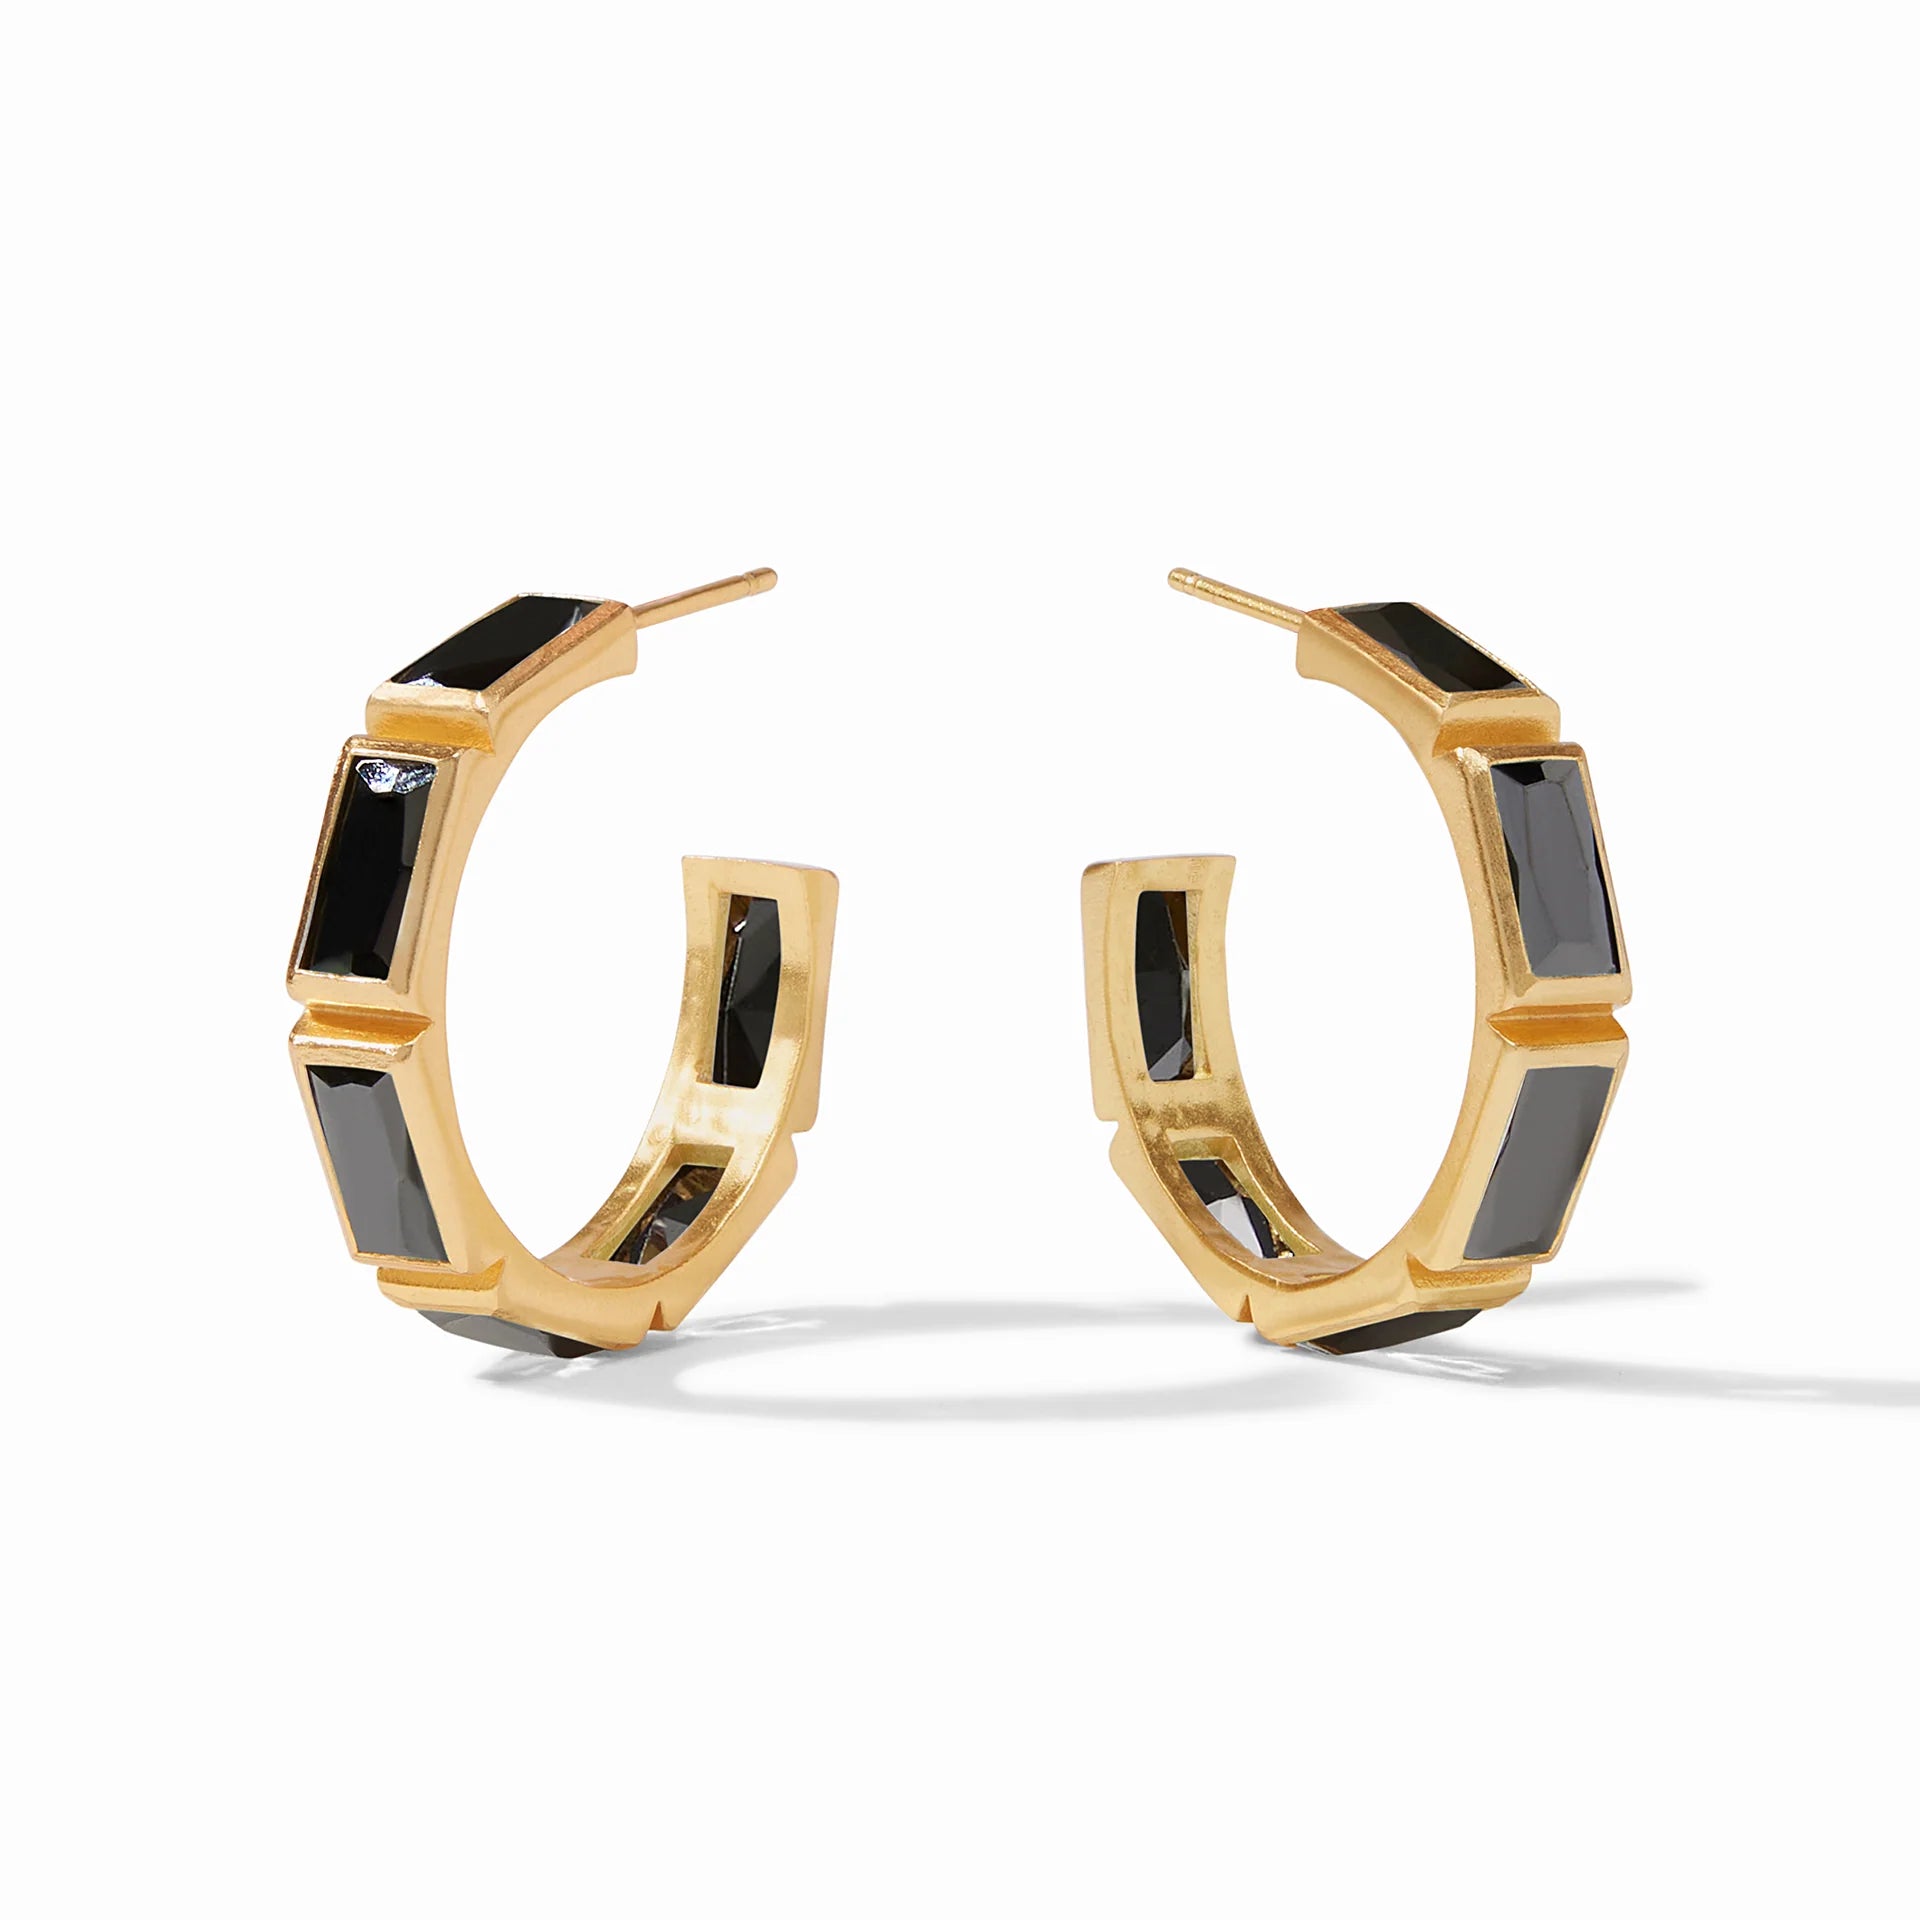 Gold hoop earrings with black, rectangle crystals pictured on a white background.